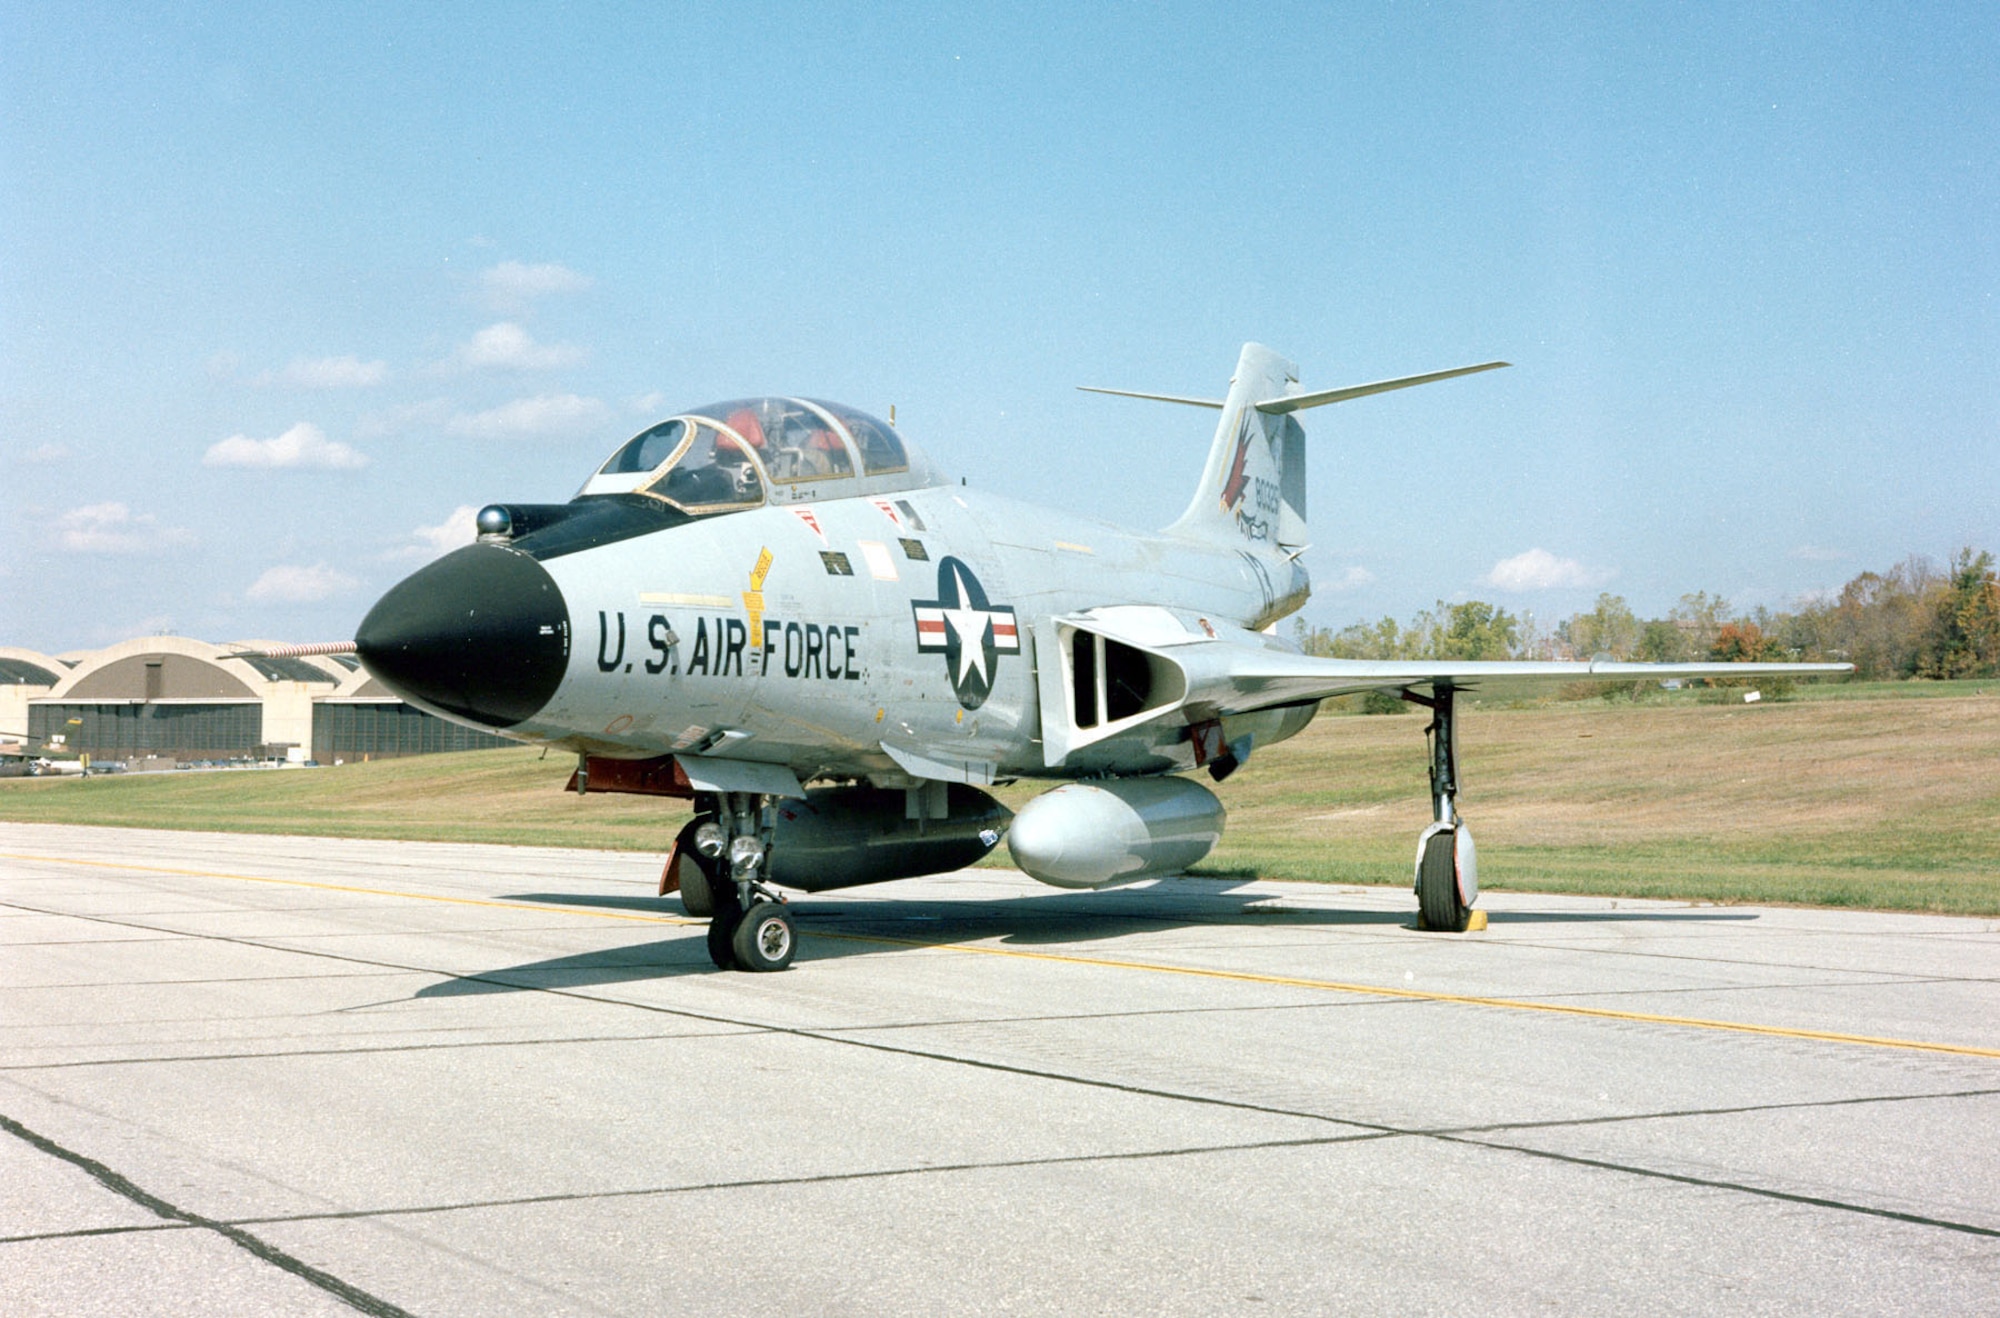 DAYTON, Ohio -- McDonnell F-101B Voodoo at the National Museum of the United States Air Force. (U.S. Air Force photo)